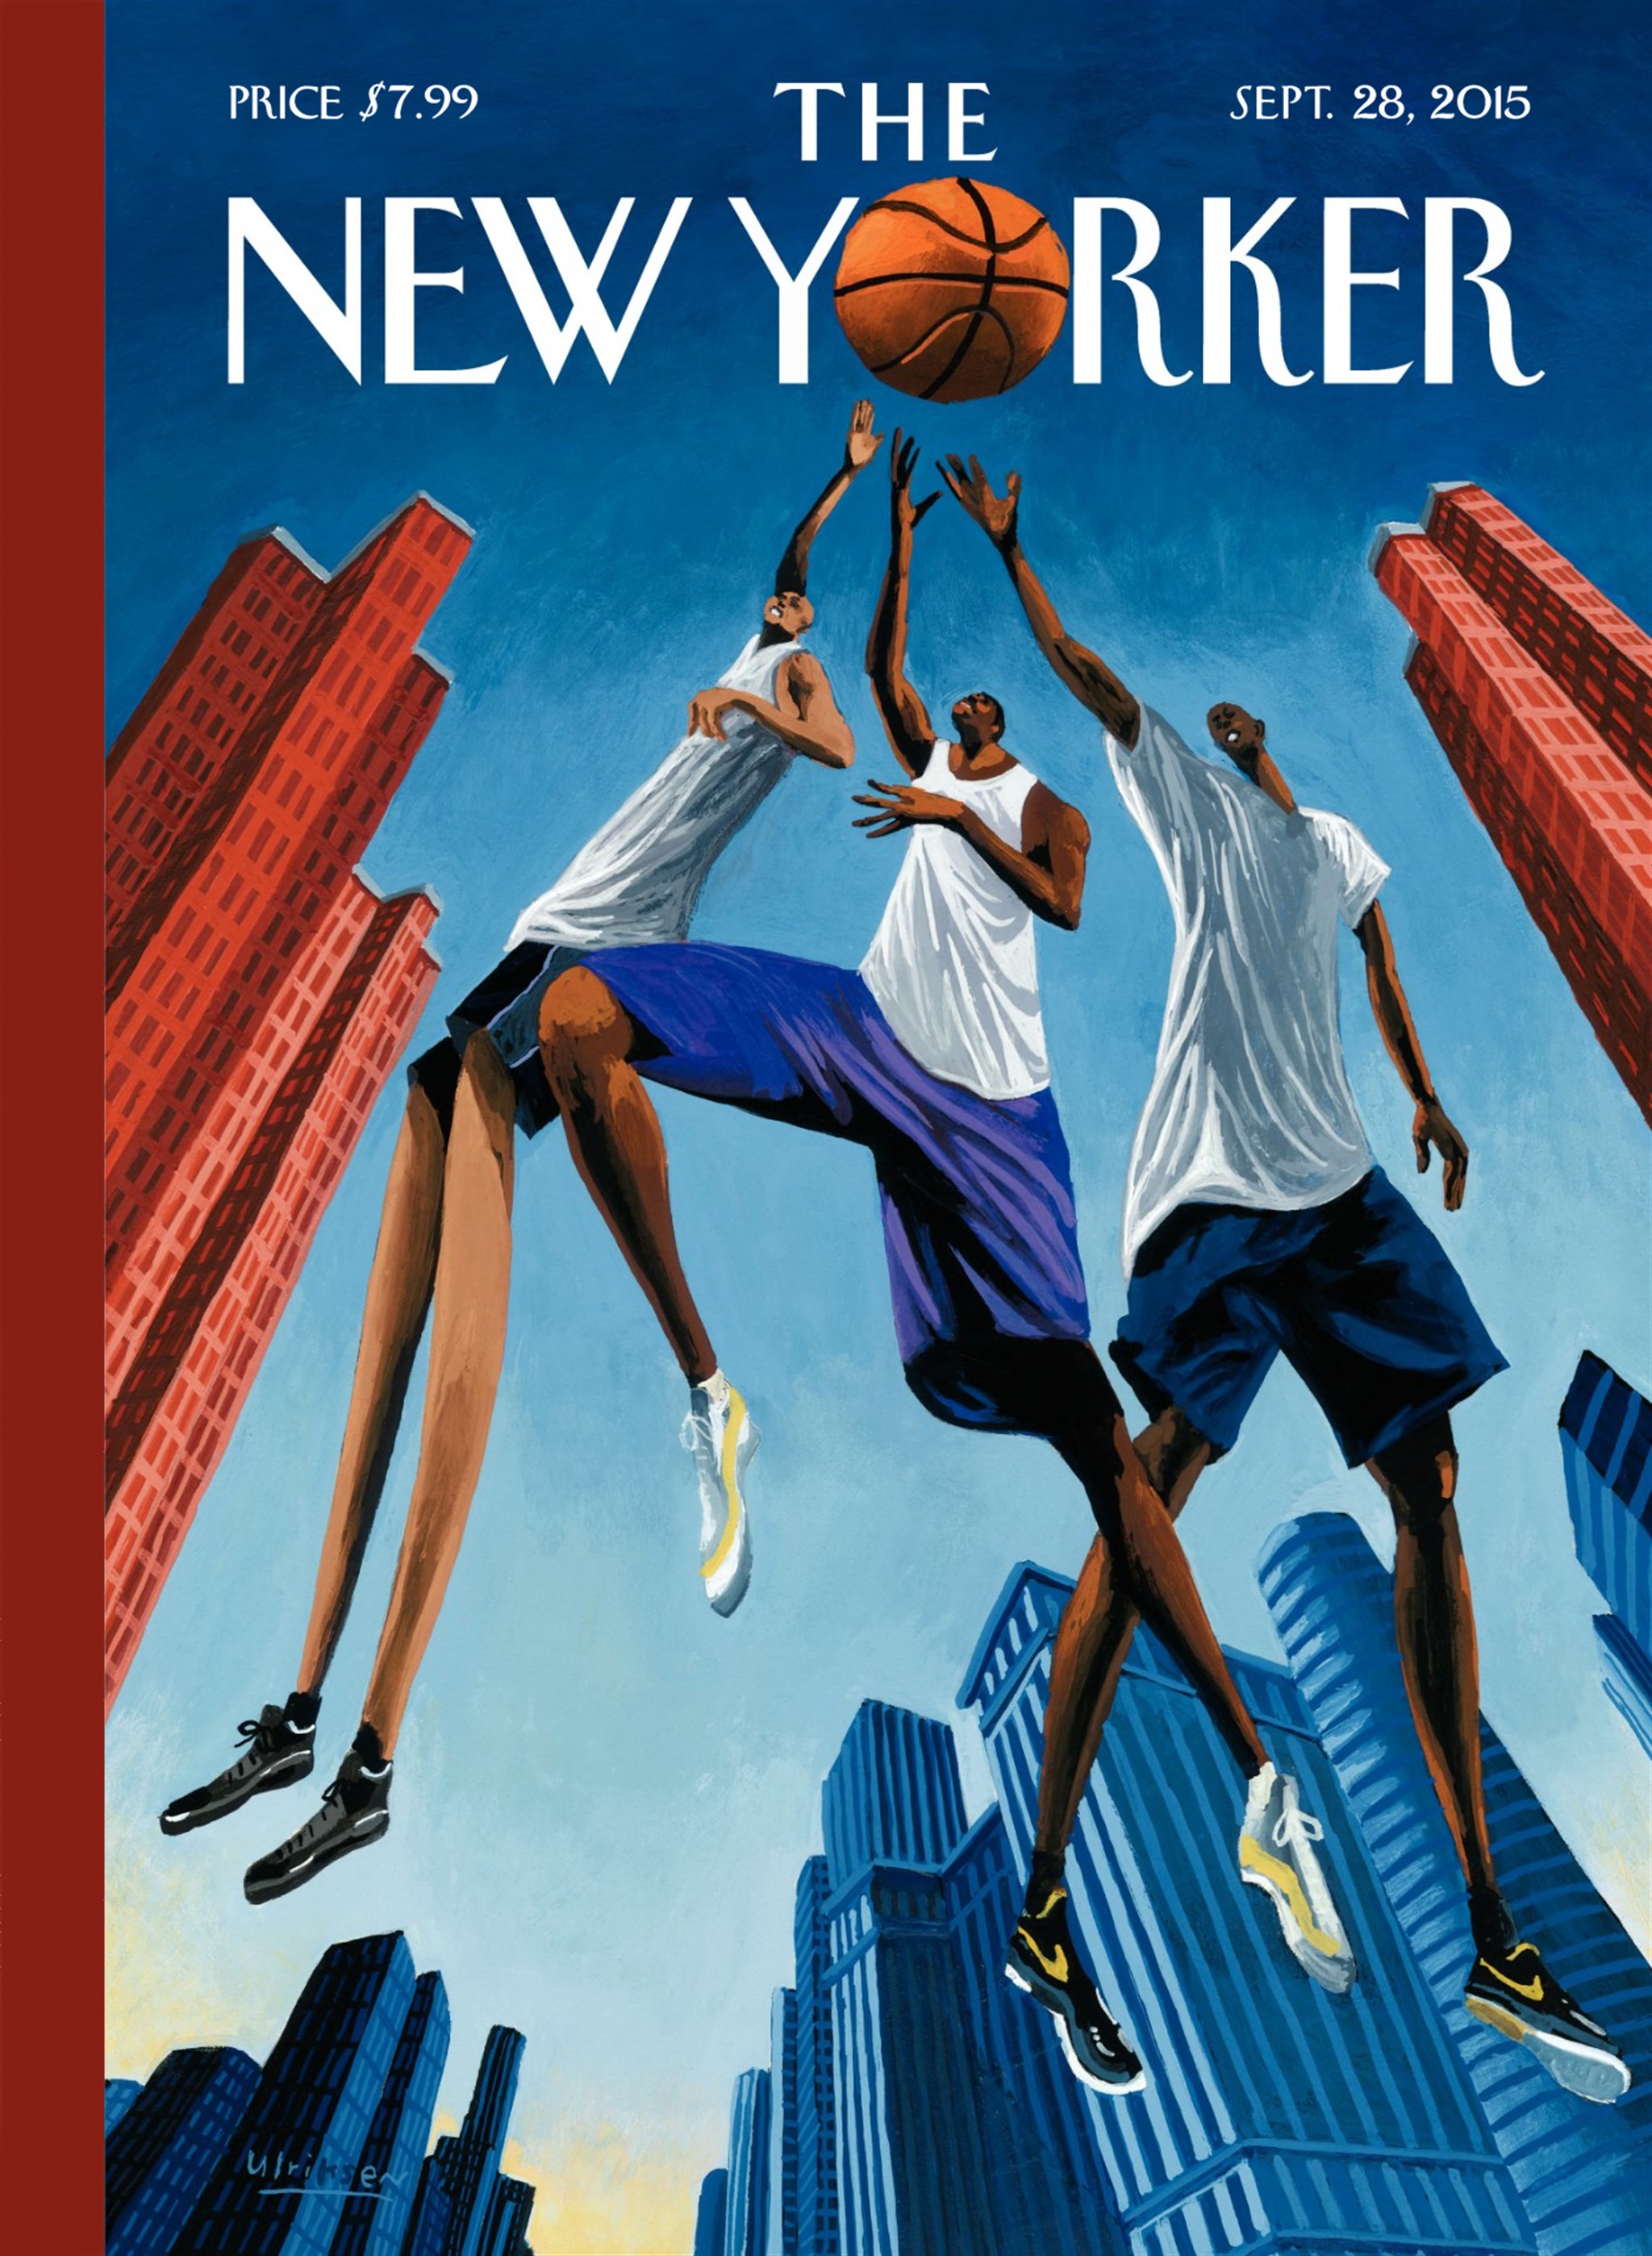 New Yorker Magazine | Subscribe to The New Yorker 